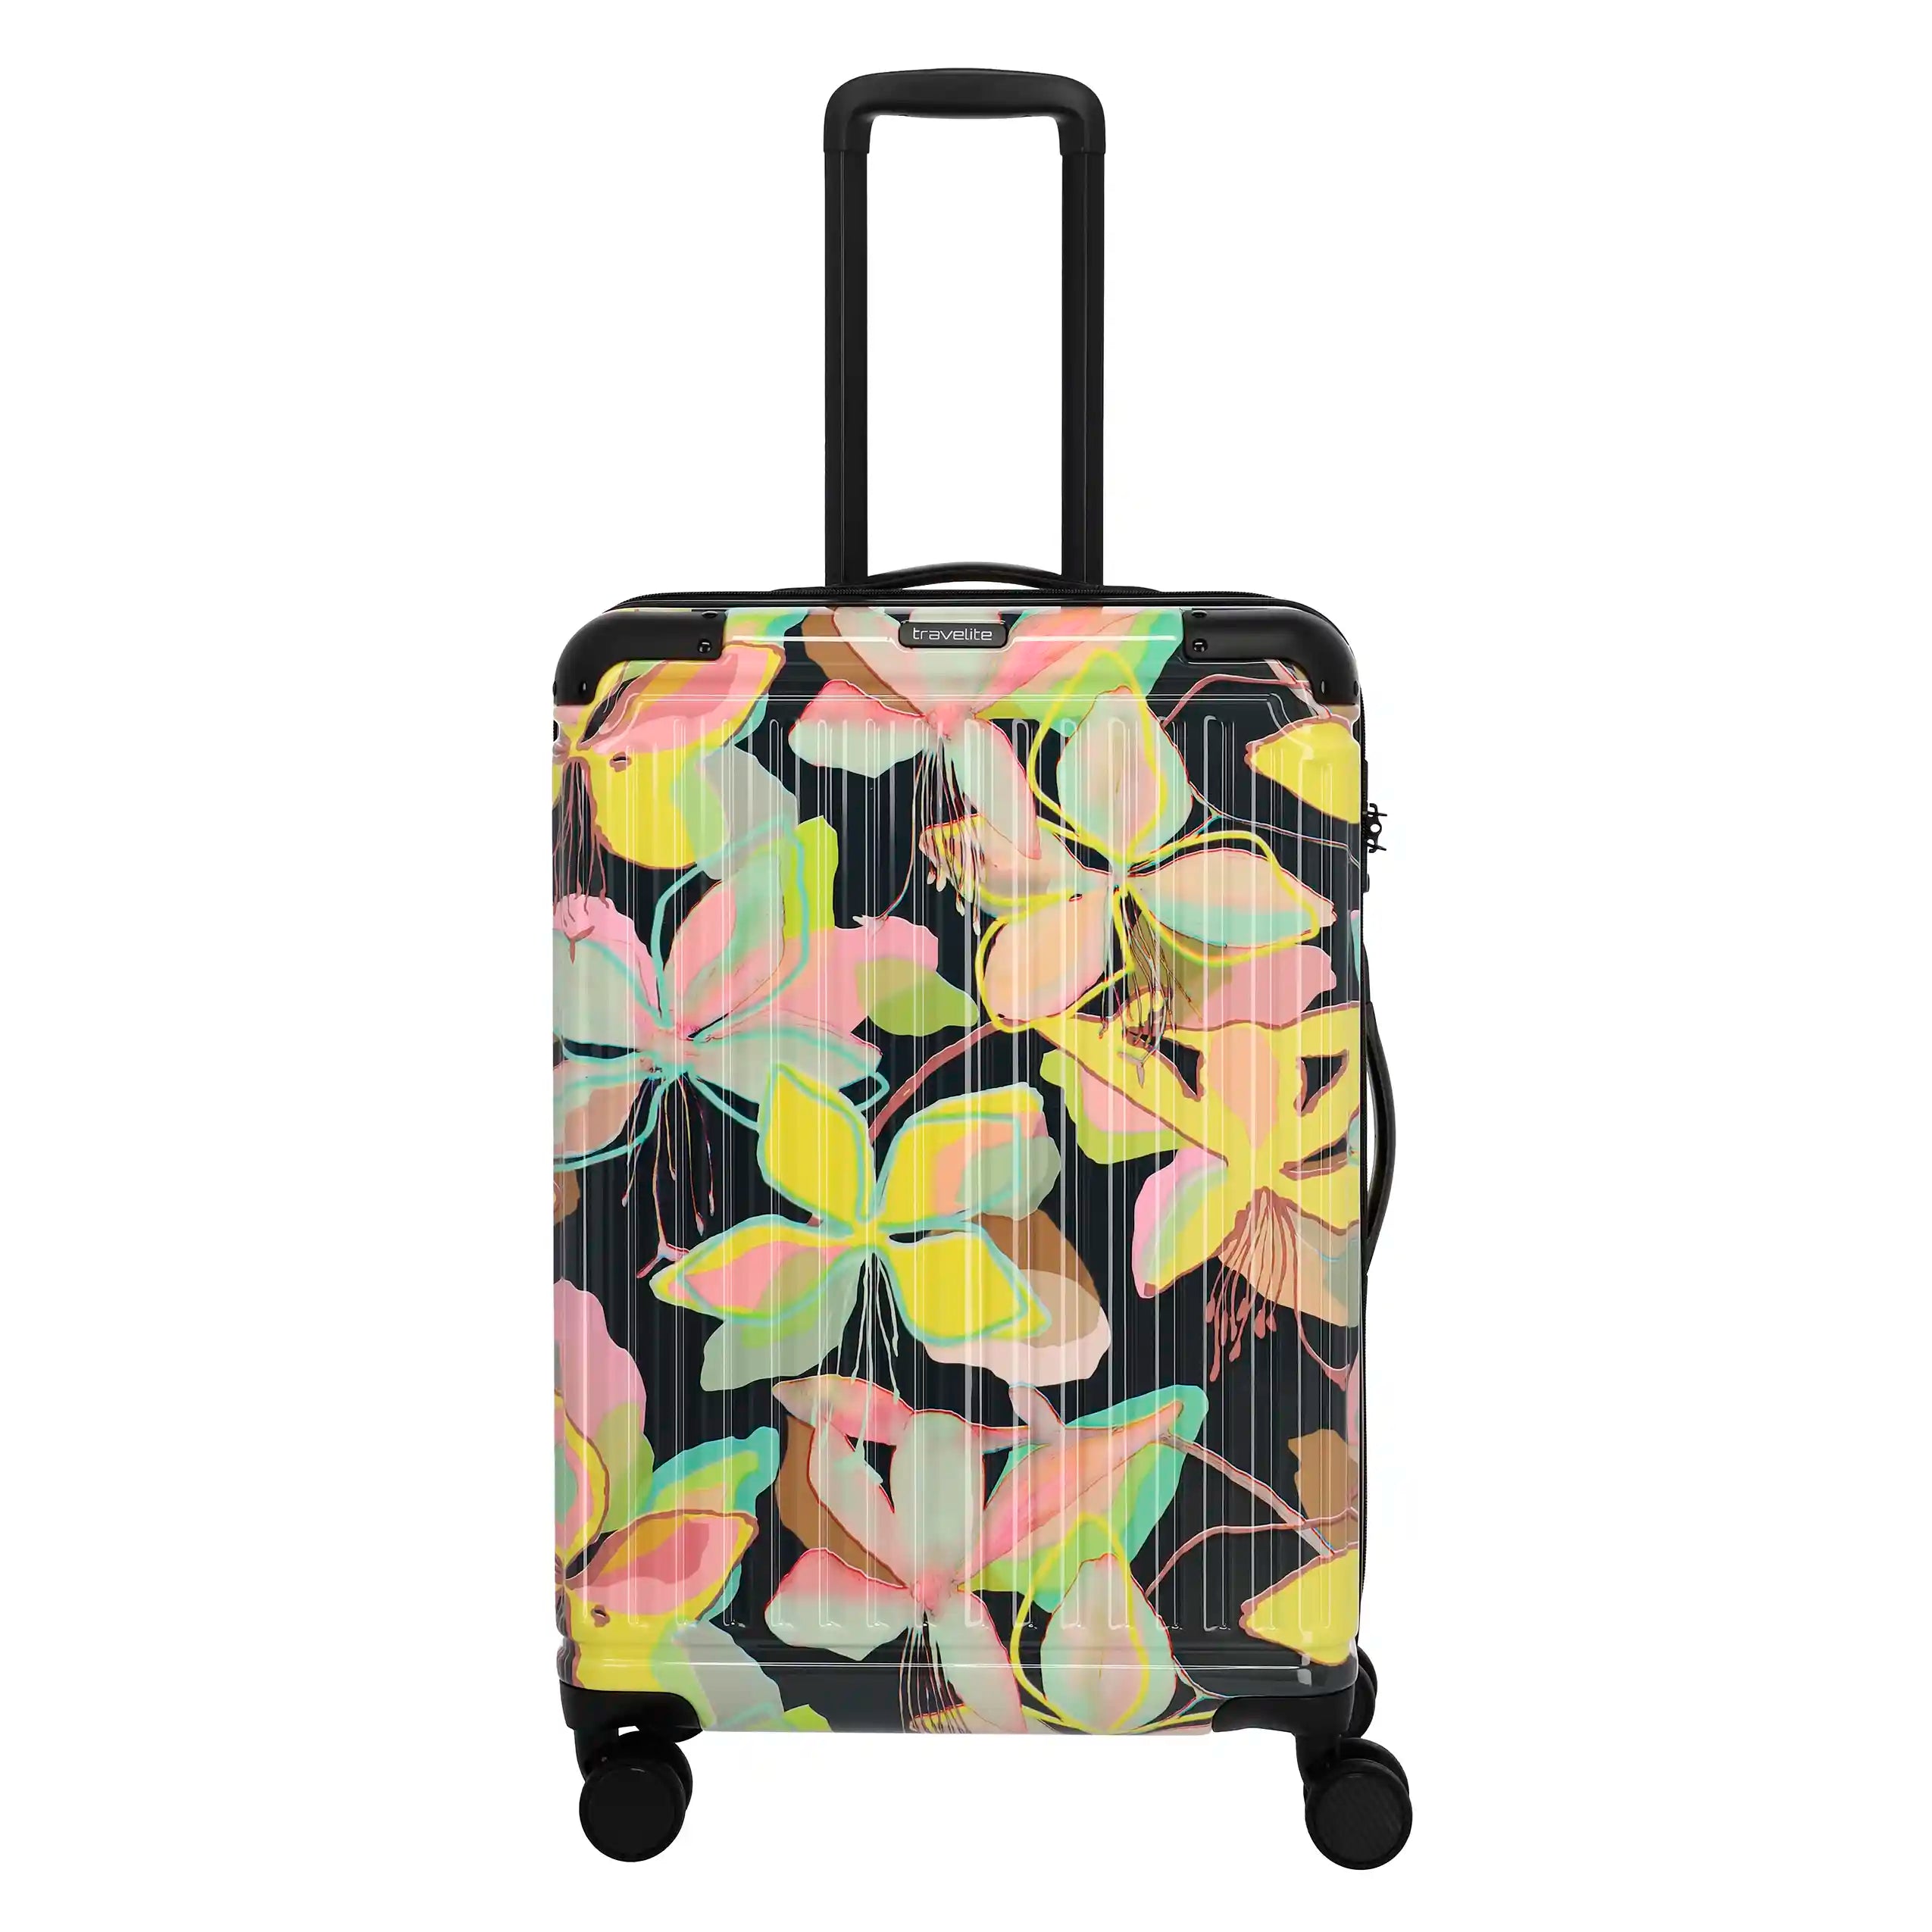 Travelite Cruise 4-wheel trolley 67 cm - Yellow Orchid